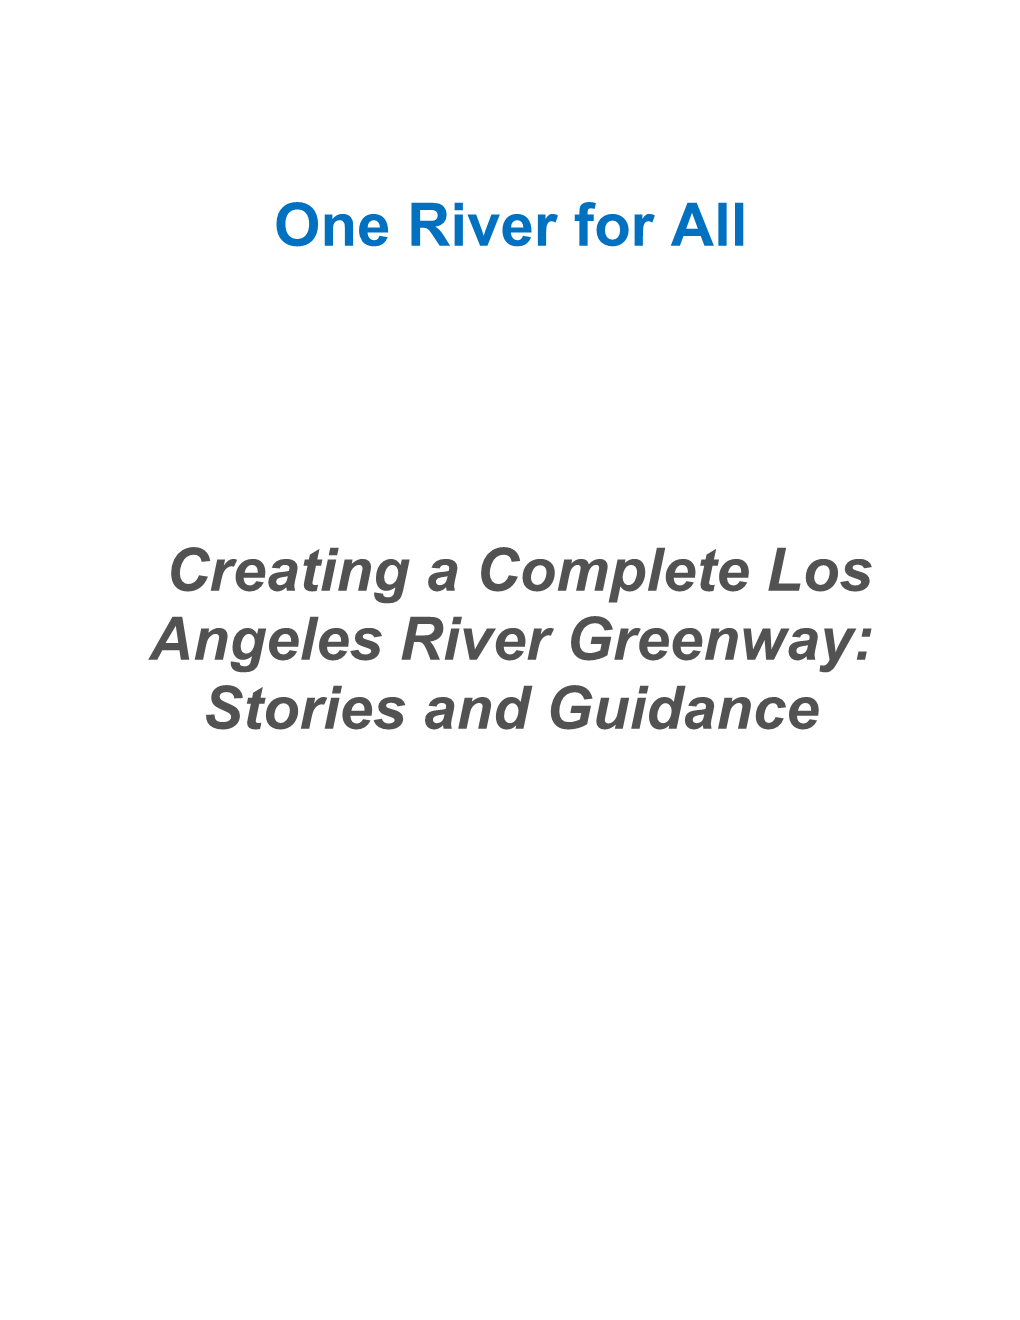 One River for All Creating a Complete Los Angeles River Greenway